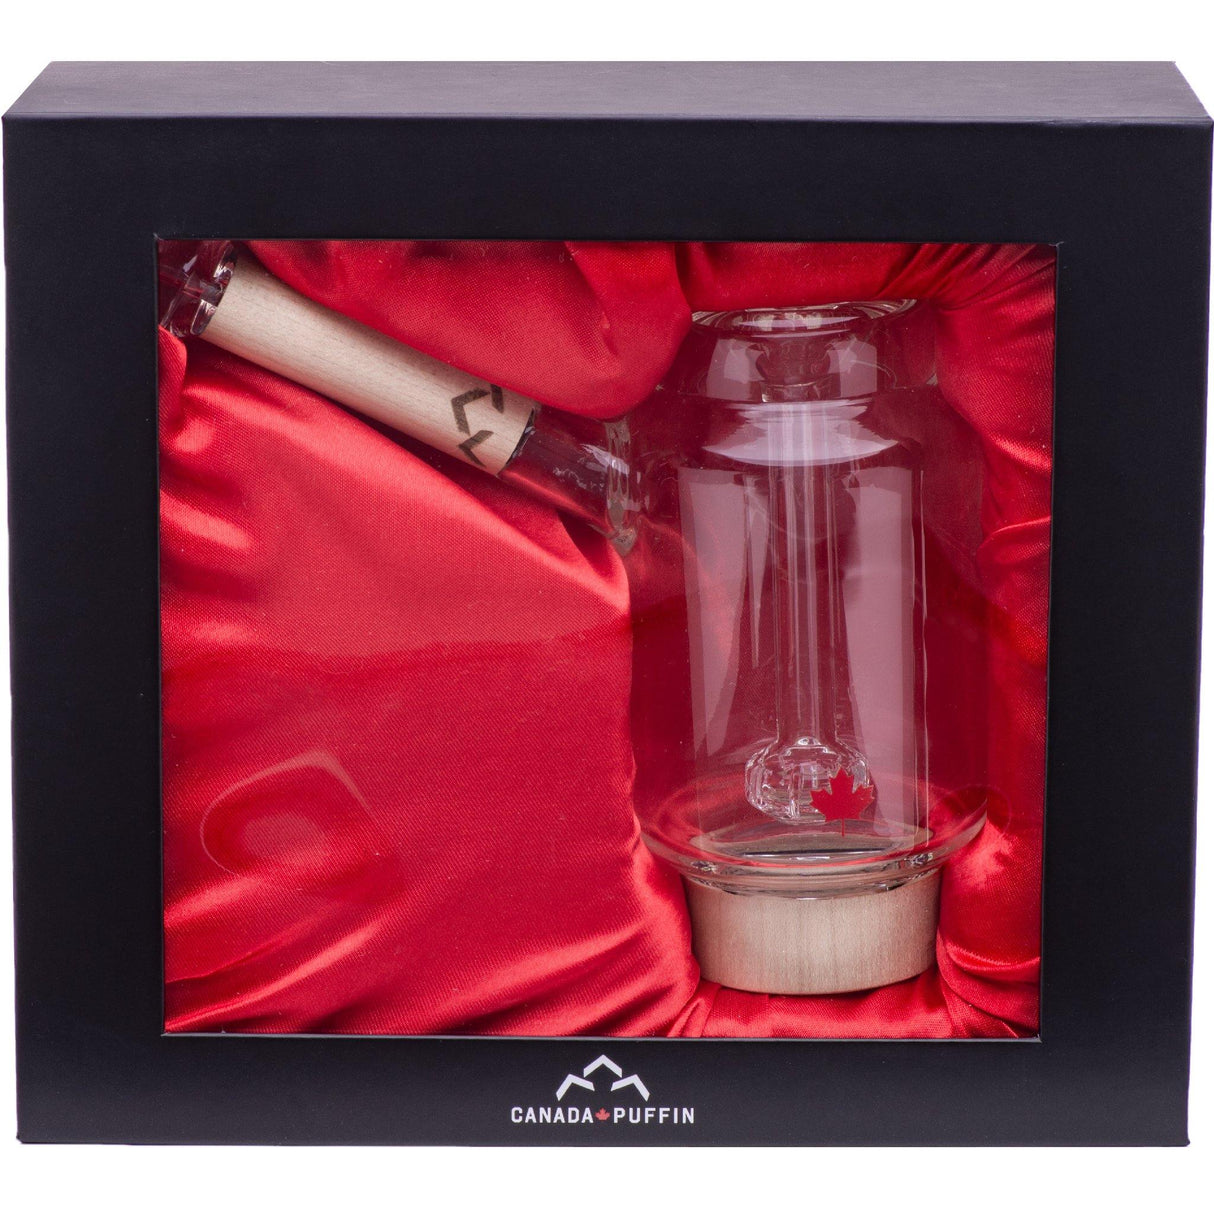 Canada Puffin Arctic Bubbler elegantly displayed in box on red satin